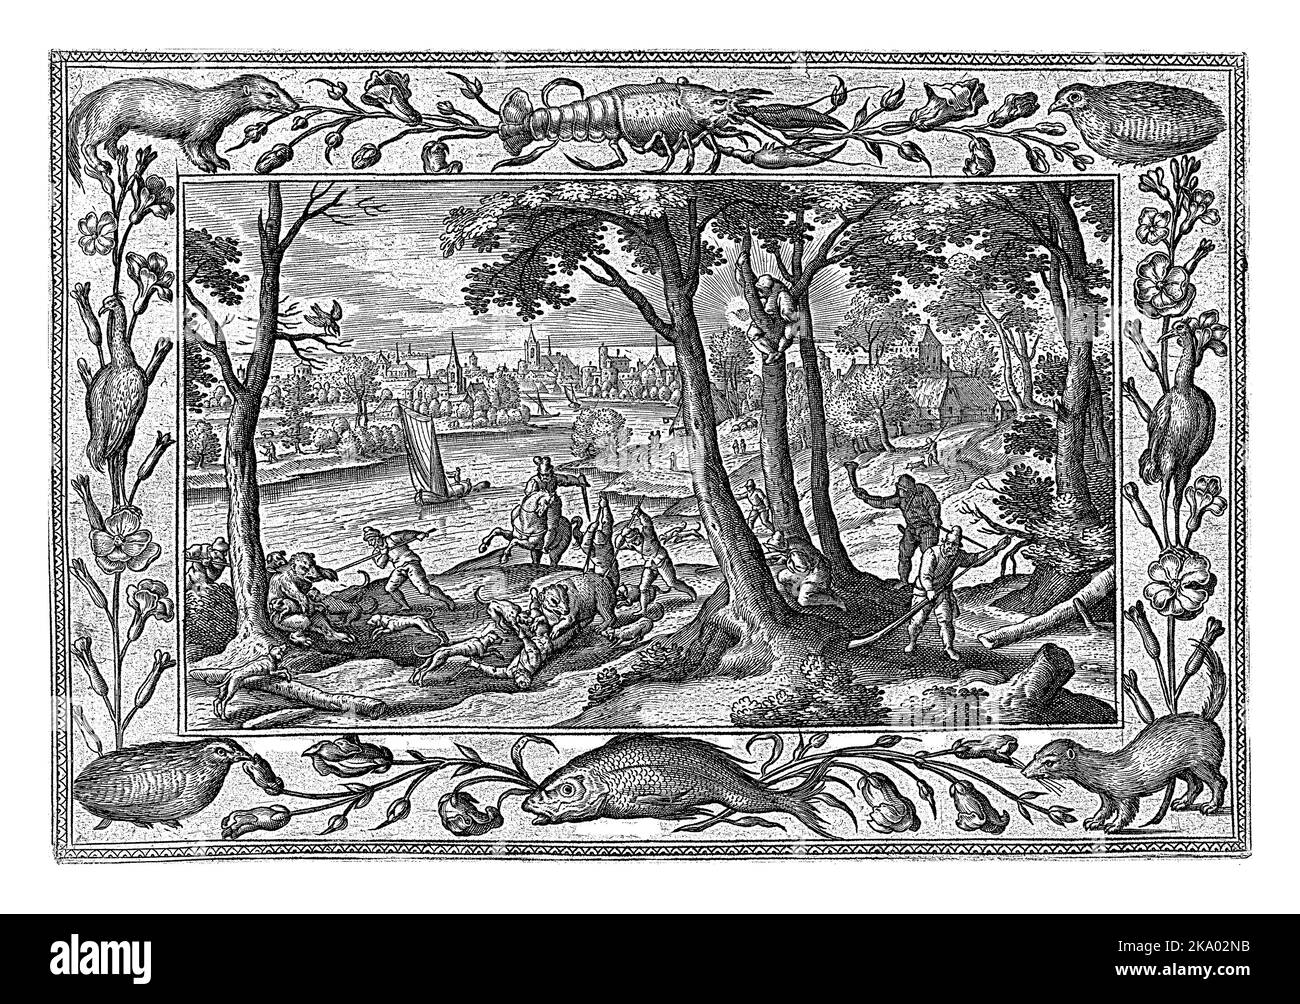 Forest landscape with bear hunt. In the foreground two bears are attacked by dogs and stabbed by hunters. The print has an ornamental frame with flowe Stock Photo